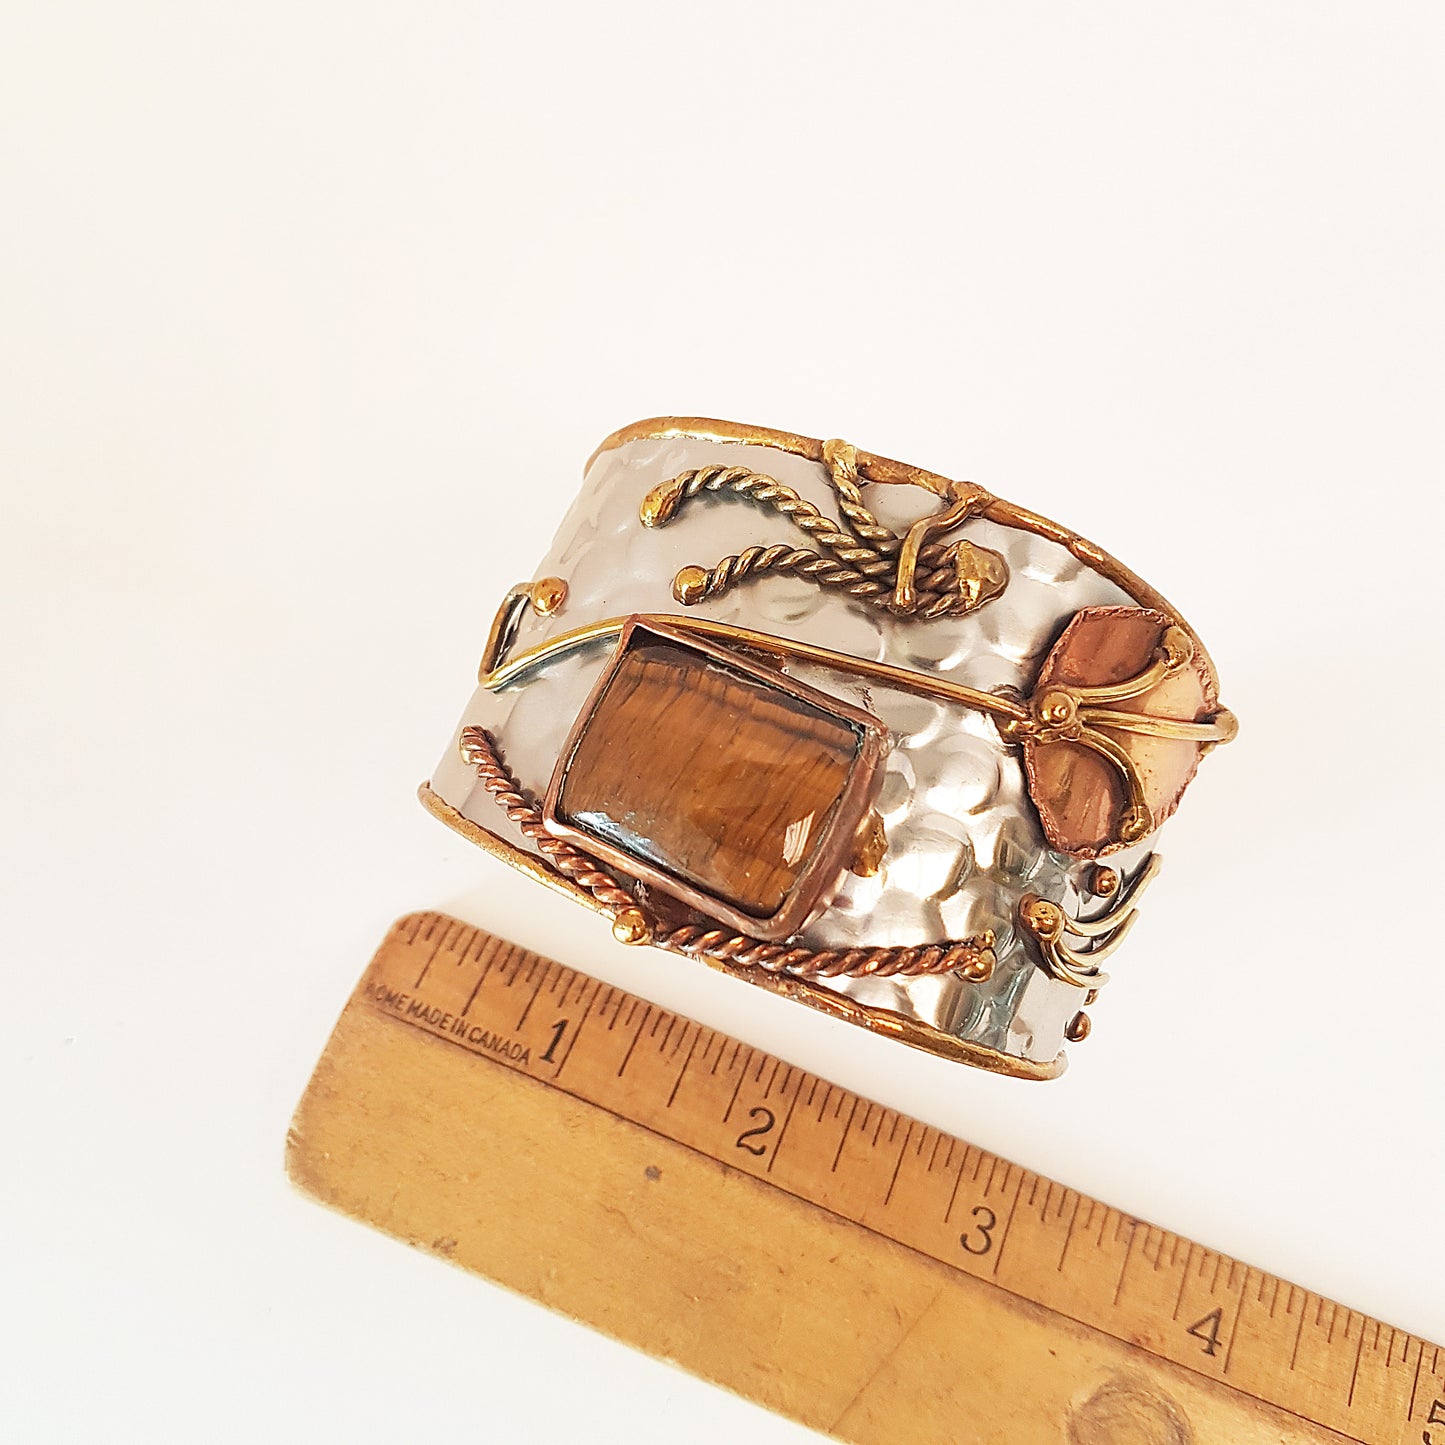 Silver cuff bracelet with rectangle shape tigereye stone. Adjustable fit. Mixed metal artisan design with copper & brass detail.